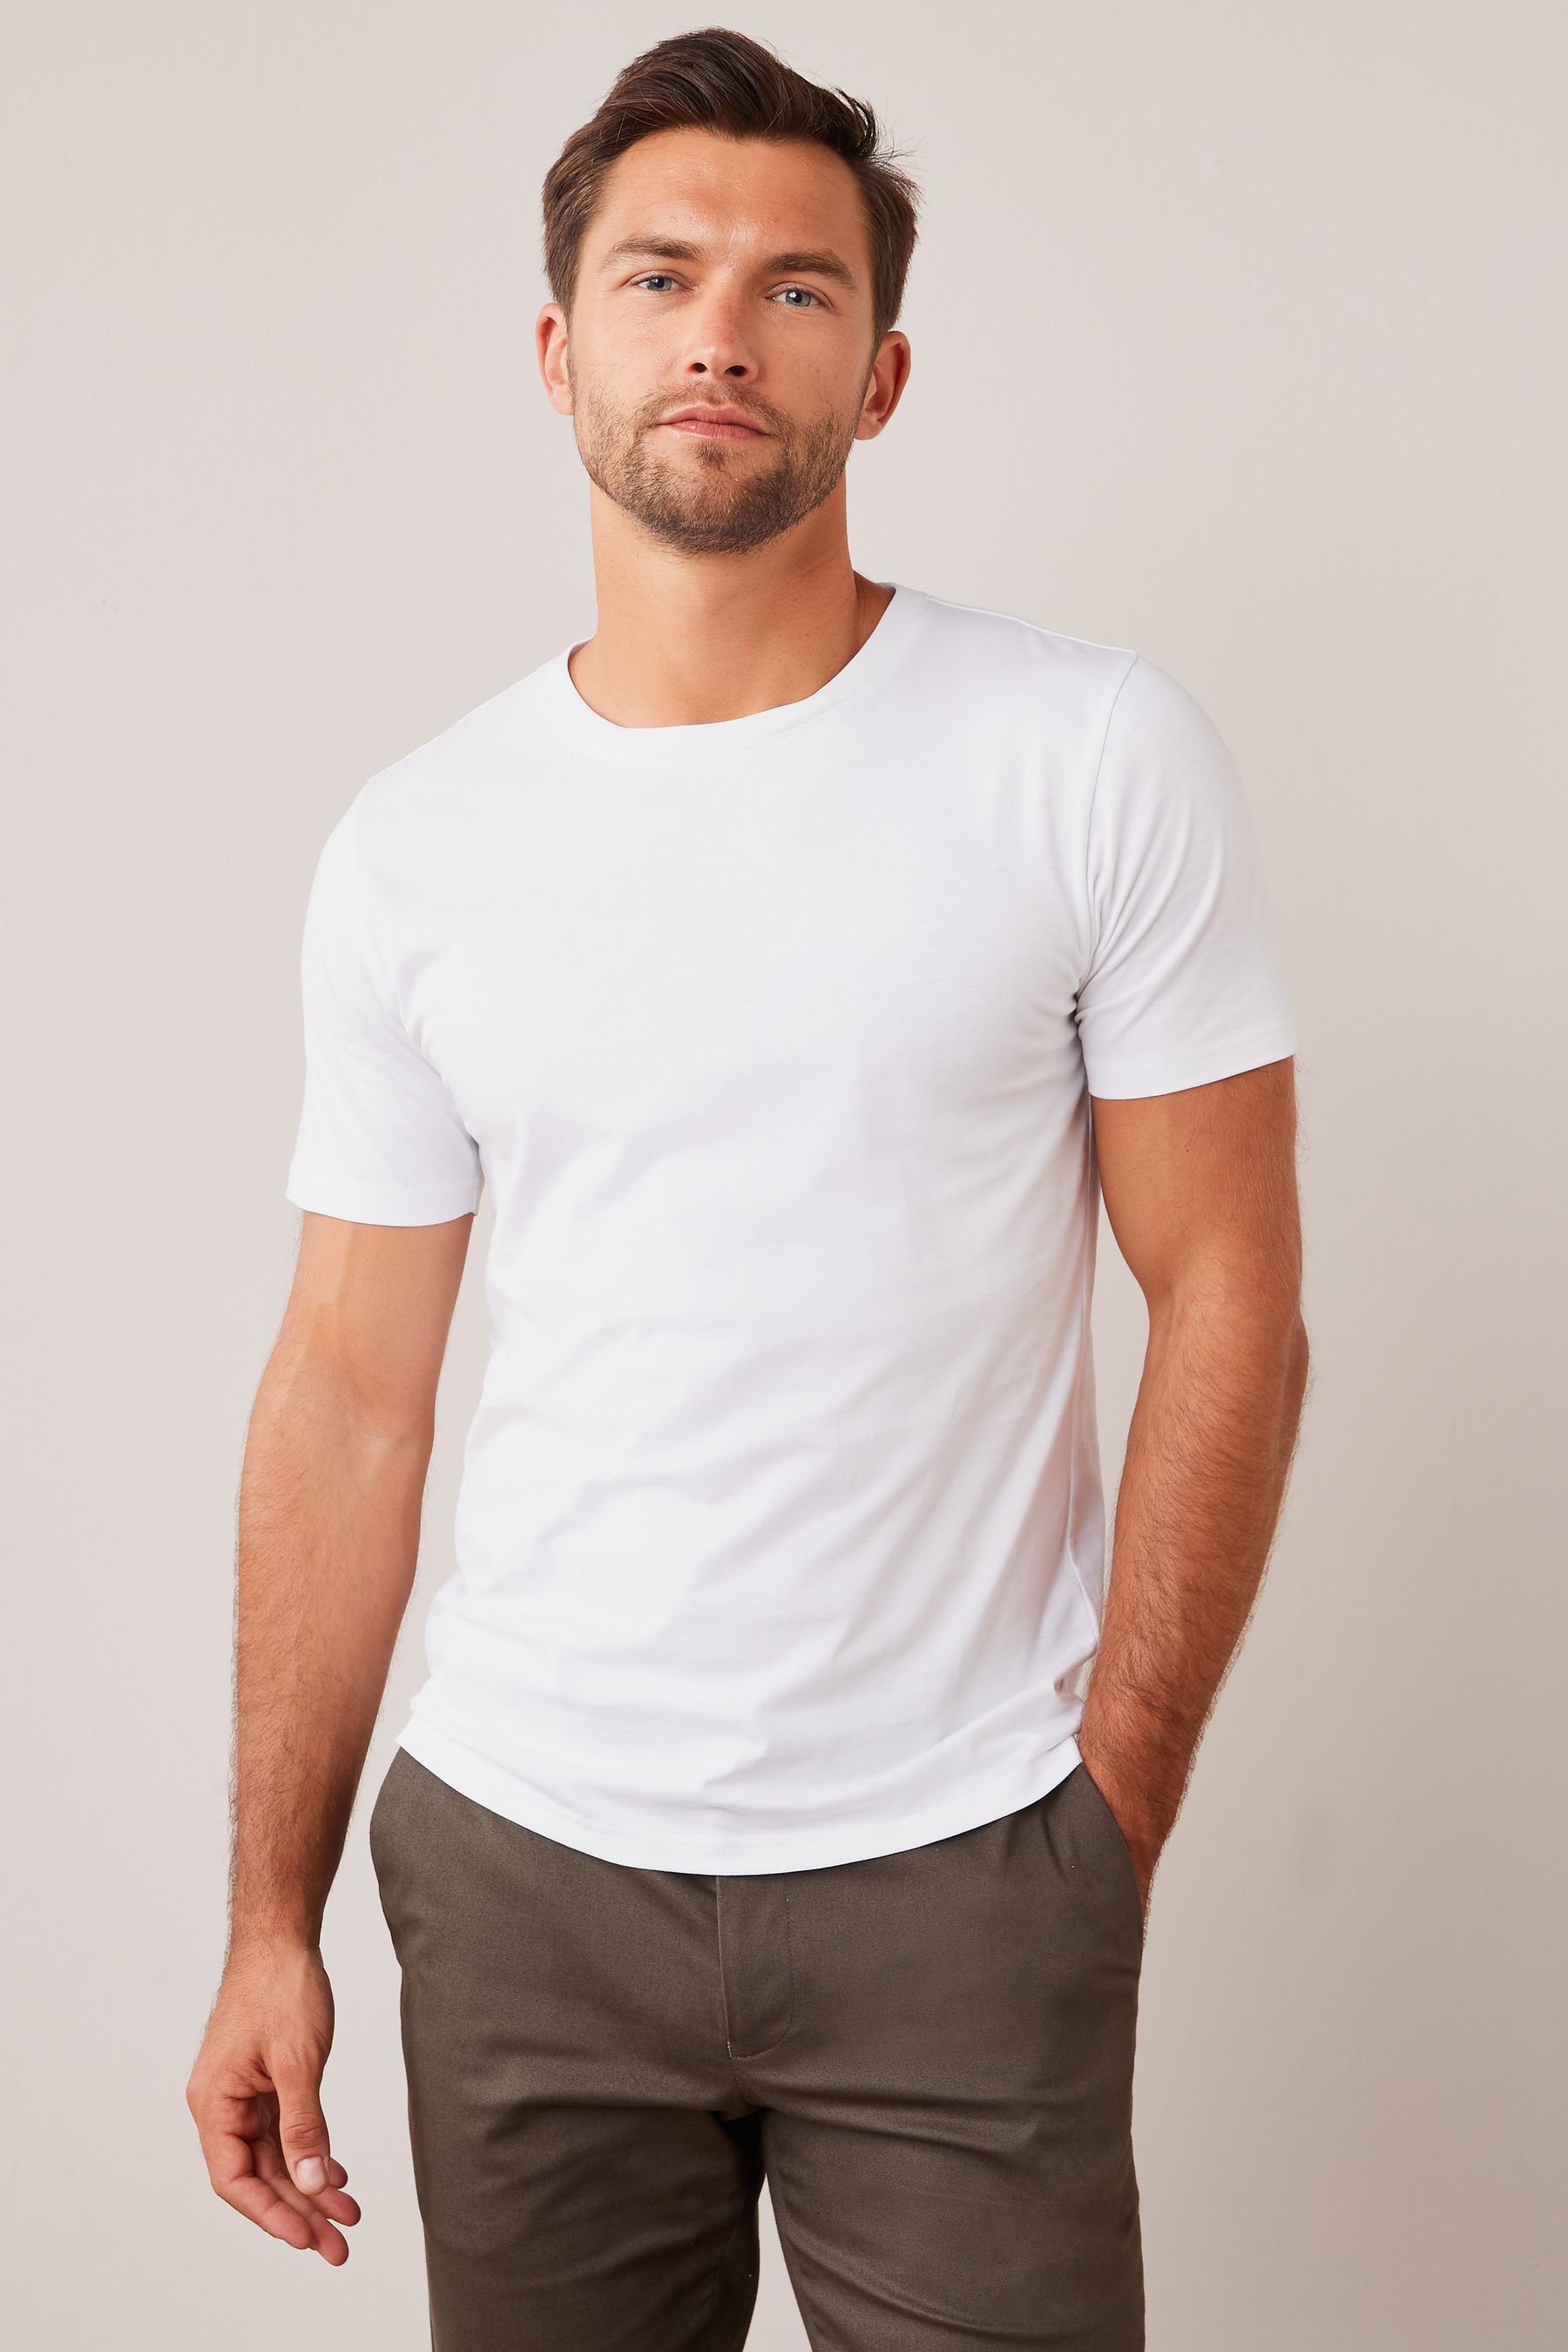 Buy White Slim Essential Crew Neck T-Shirt from the Next UK online shop